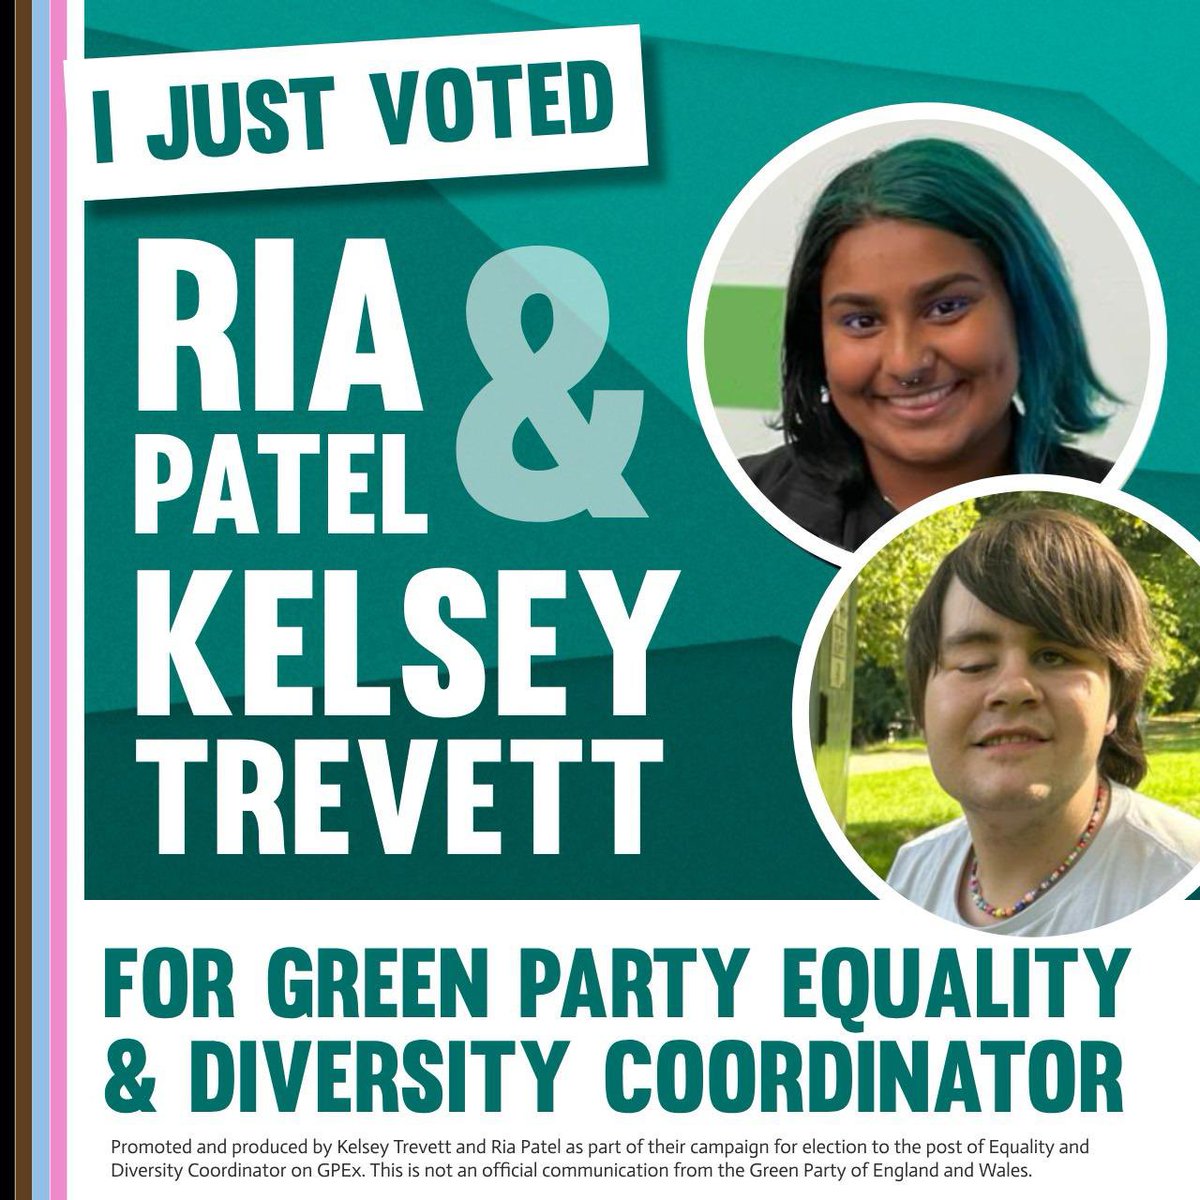 Have you voted for equality and diversity coordinator yet? I voted for @Ria__Patel and @CouldBeKel they both have a huge amount of experience and I couldn’t imagine a better team for the role. Voting closes at 10pm today so please make sure you vote before then!!